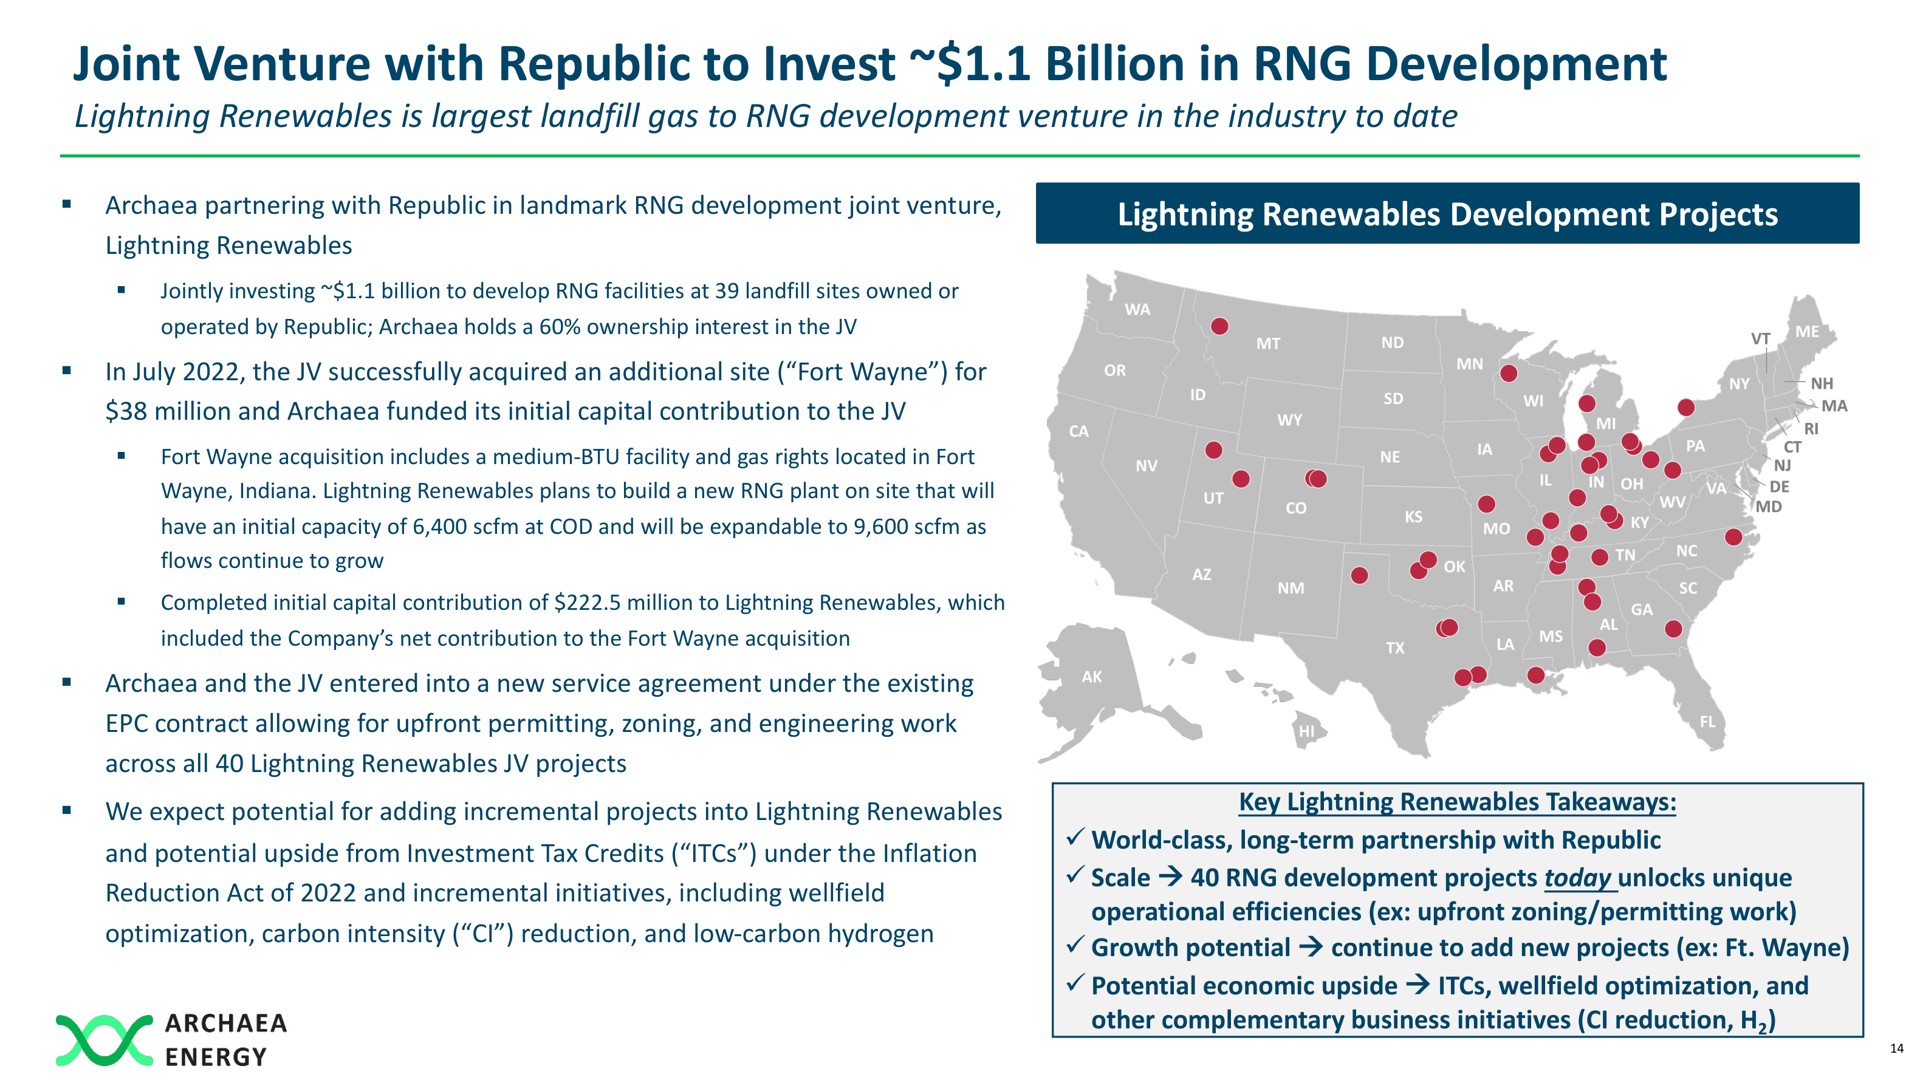 joint venture with republic to invest billion in development a | Archaea Energy